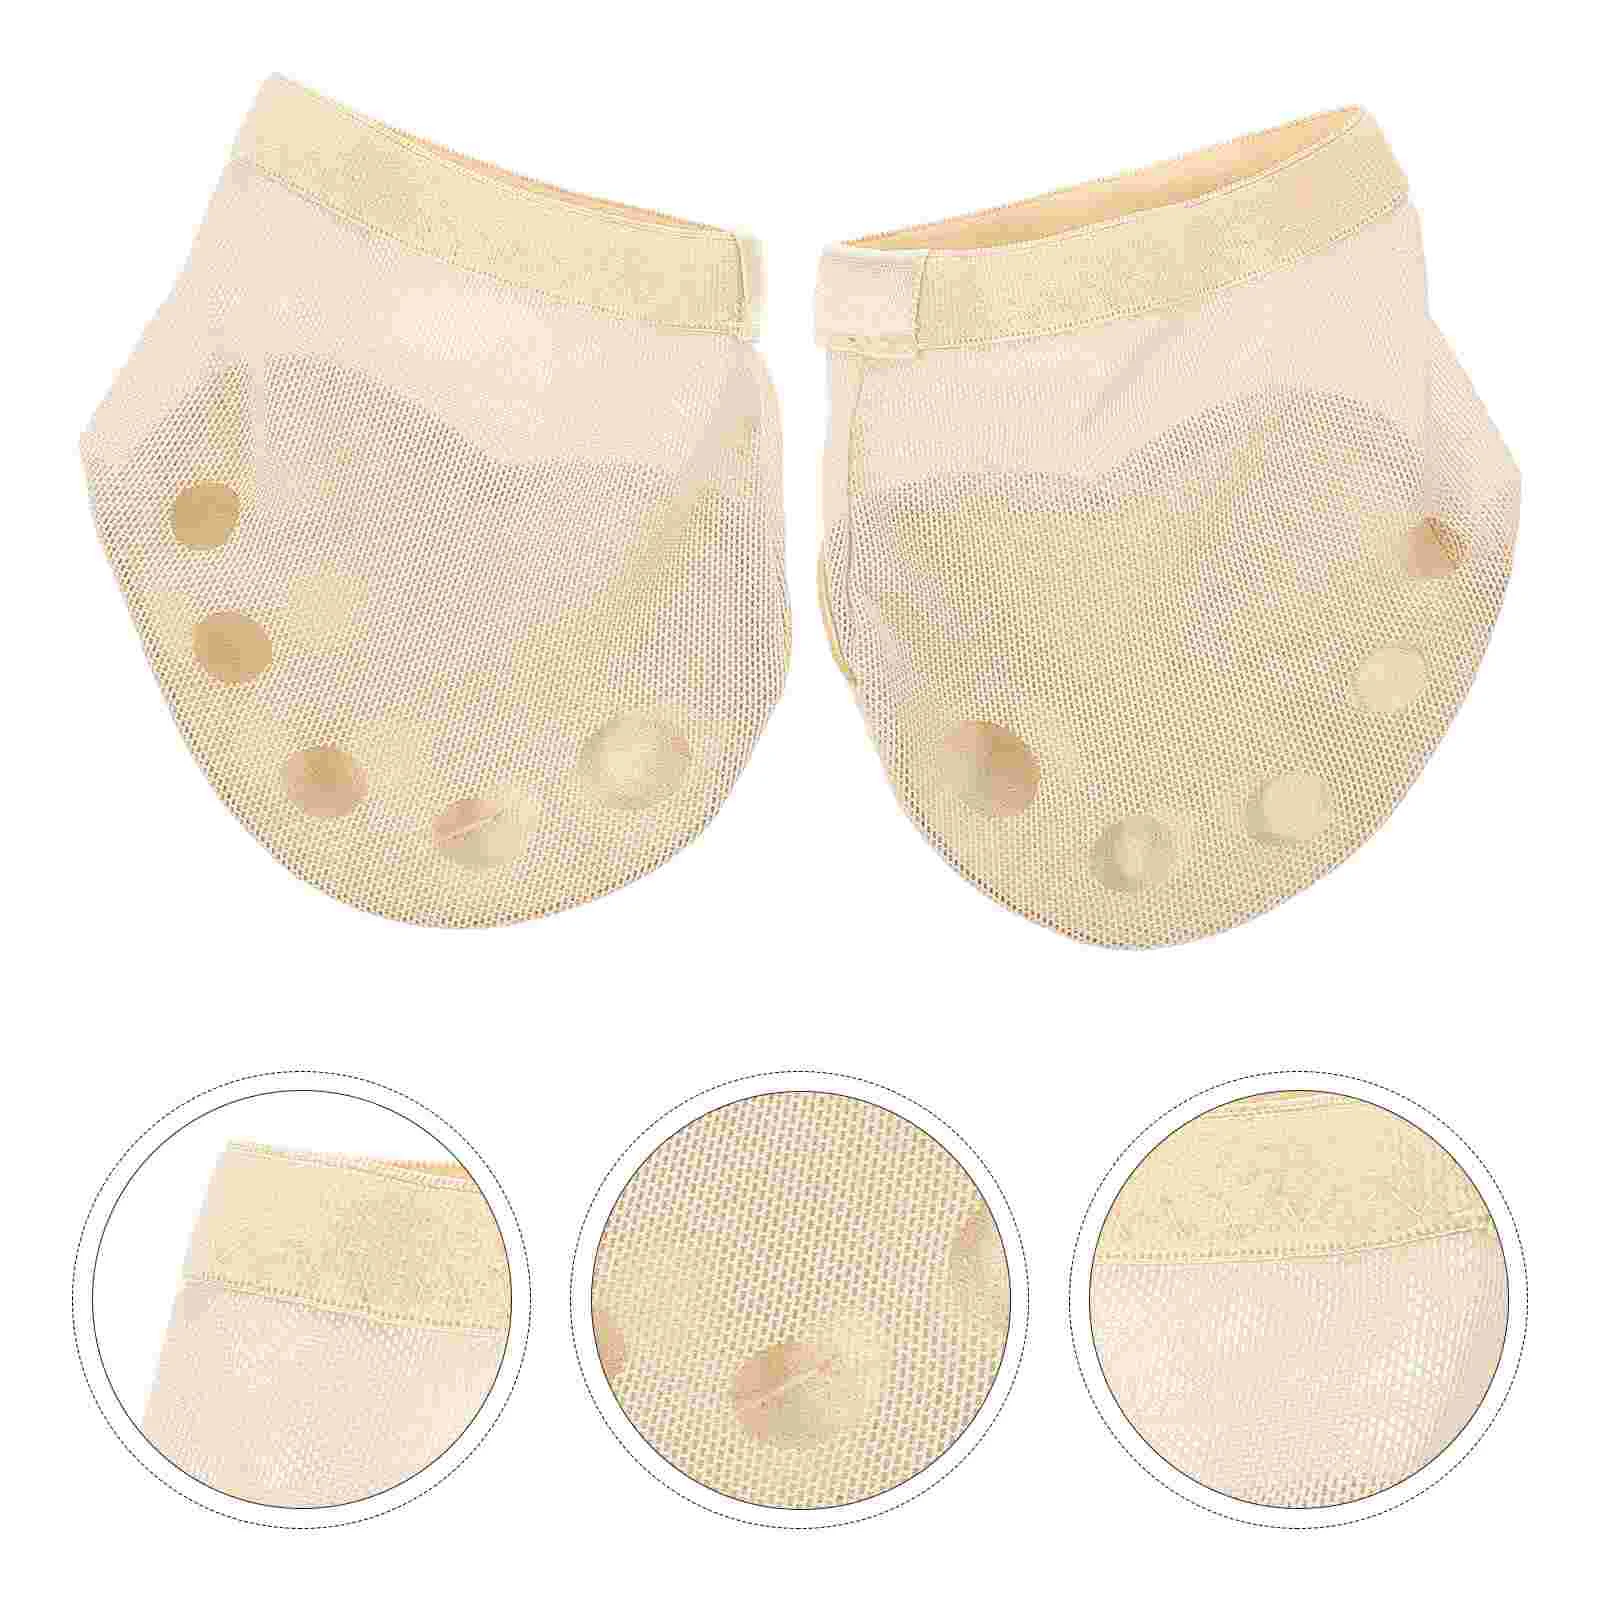 1 Pair Five Holes Half Socks Forefoot Cushion Protective Foot Paw Foot Care Supplies for Ballet Size S a5 b5 a4 60 sheets simple cover diary traveler loose leaf notebook simple schedule book 26 holes journal school office supplies